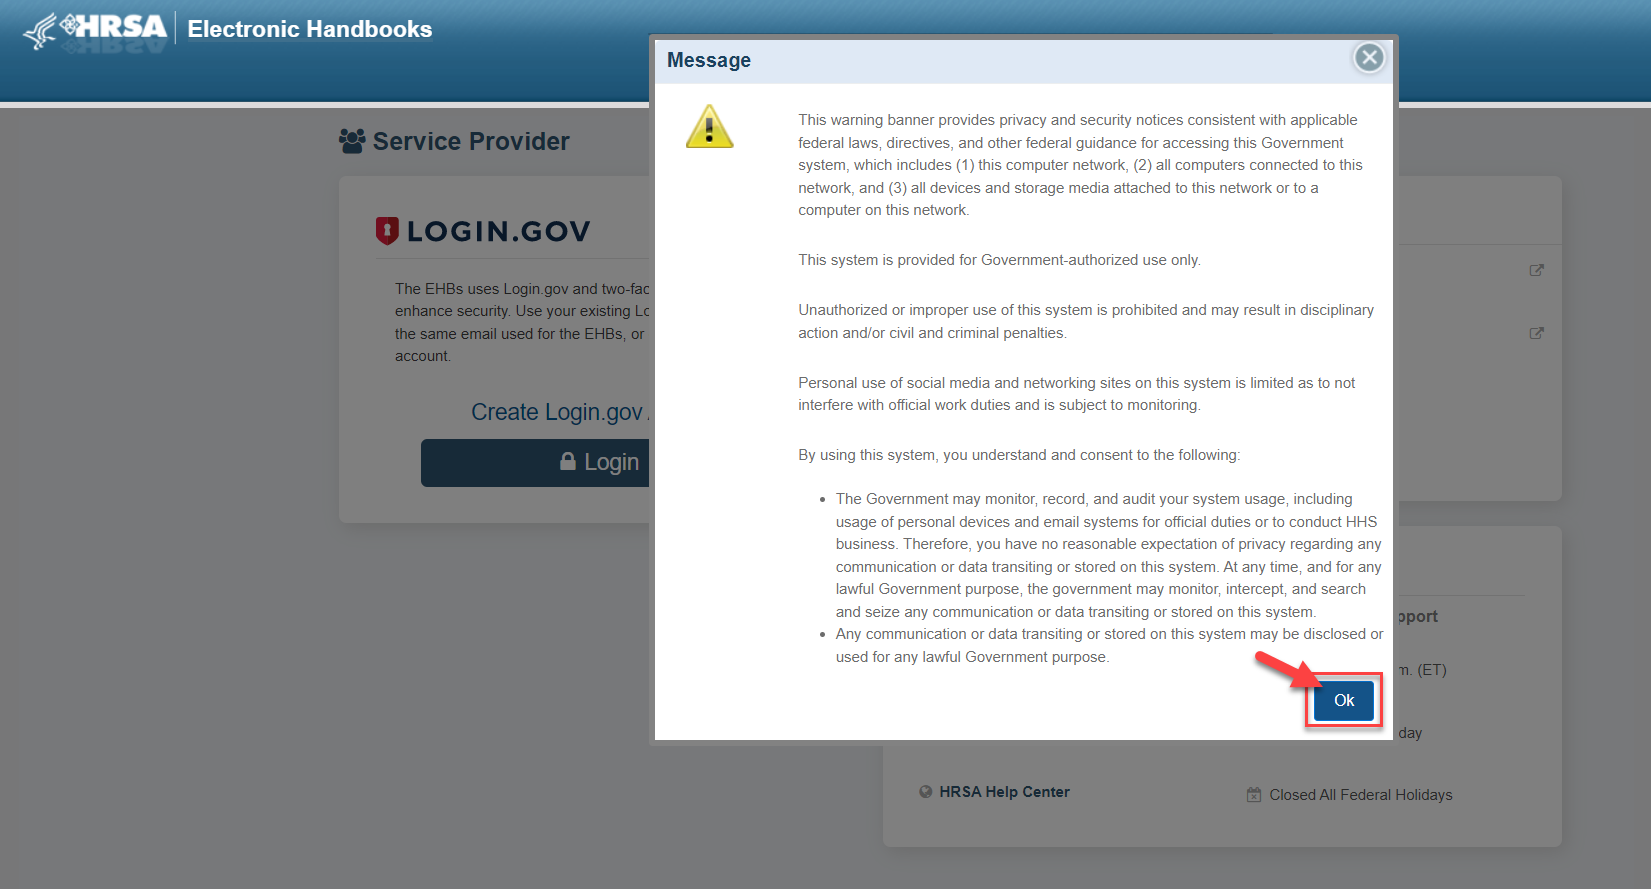 Screenshot of the EHBs privacy warning message